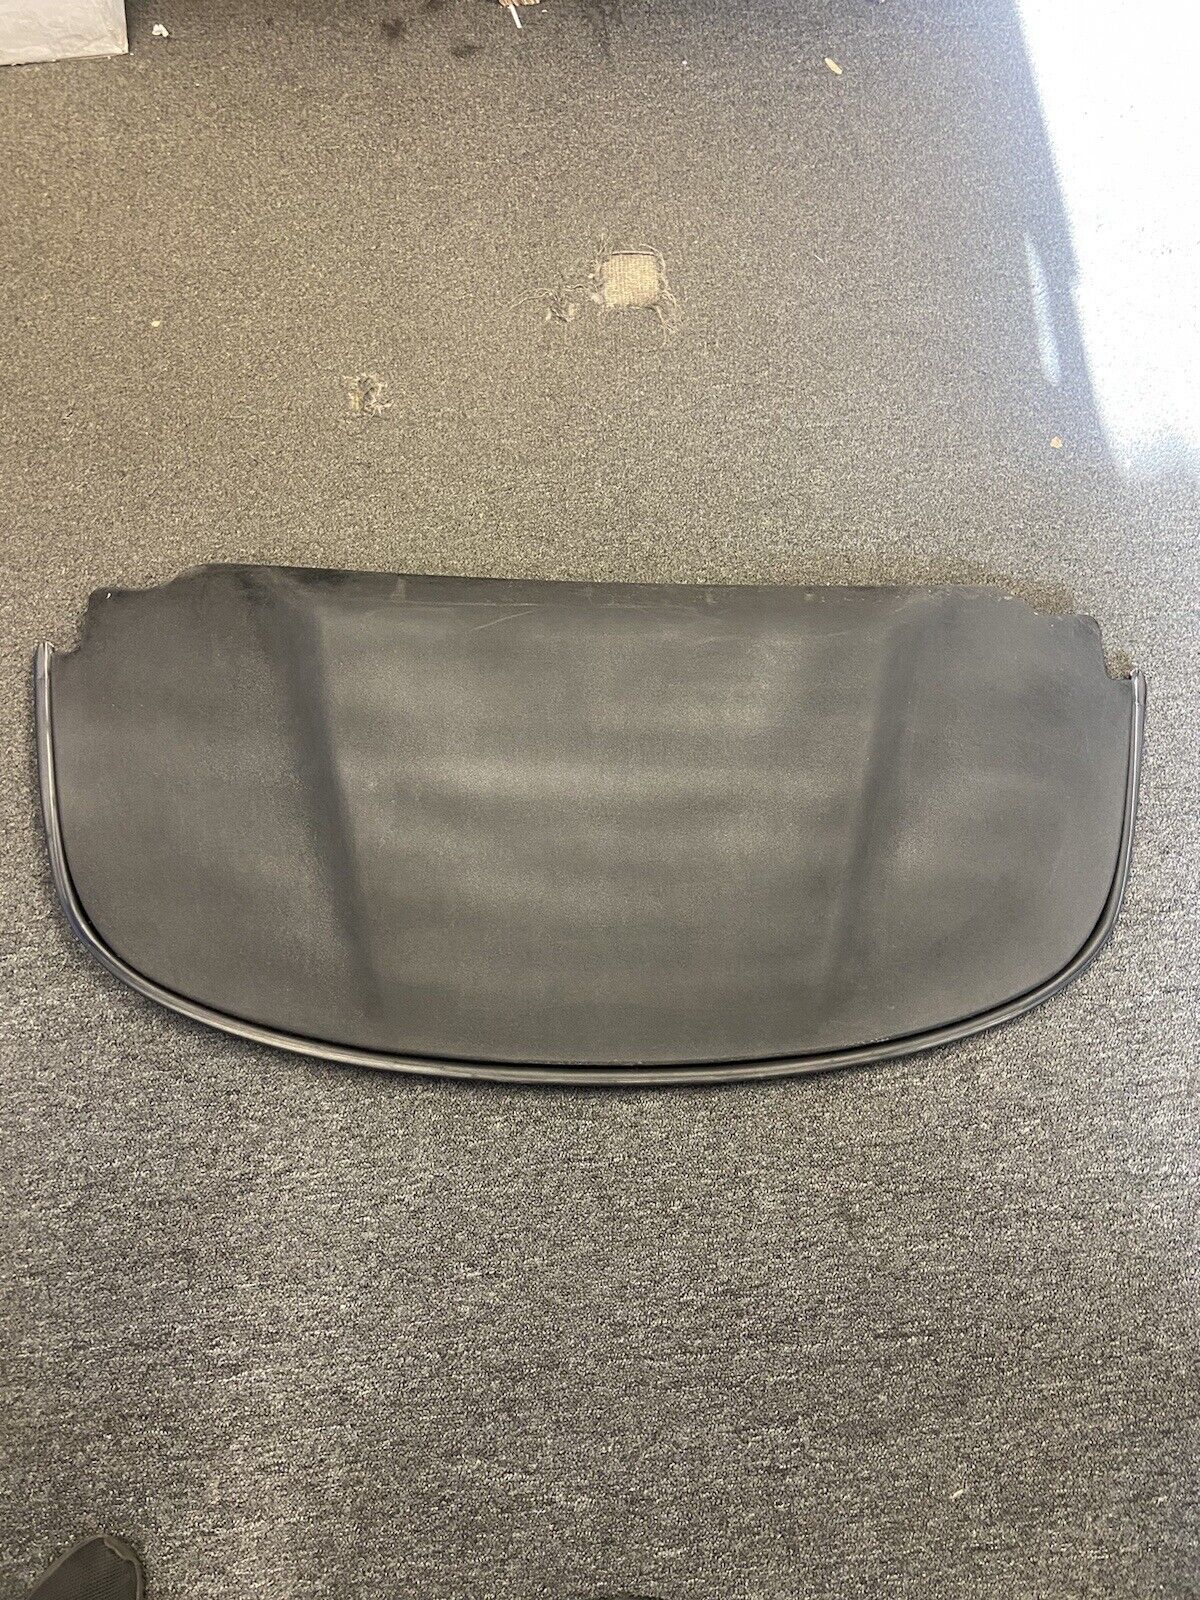 1991 NSX Rear Engine Cover